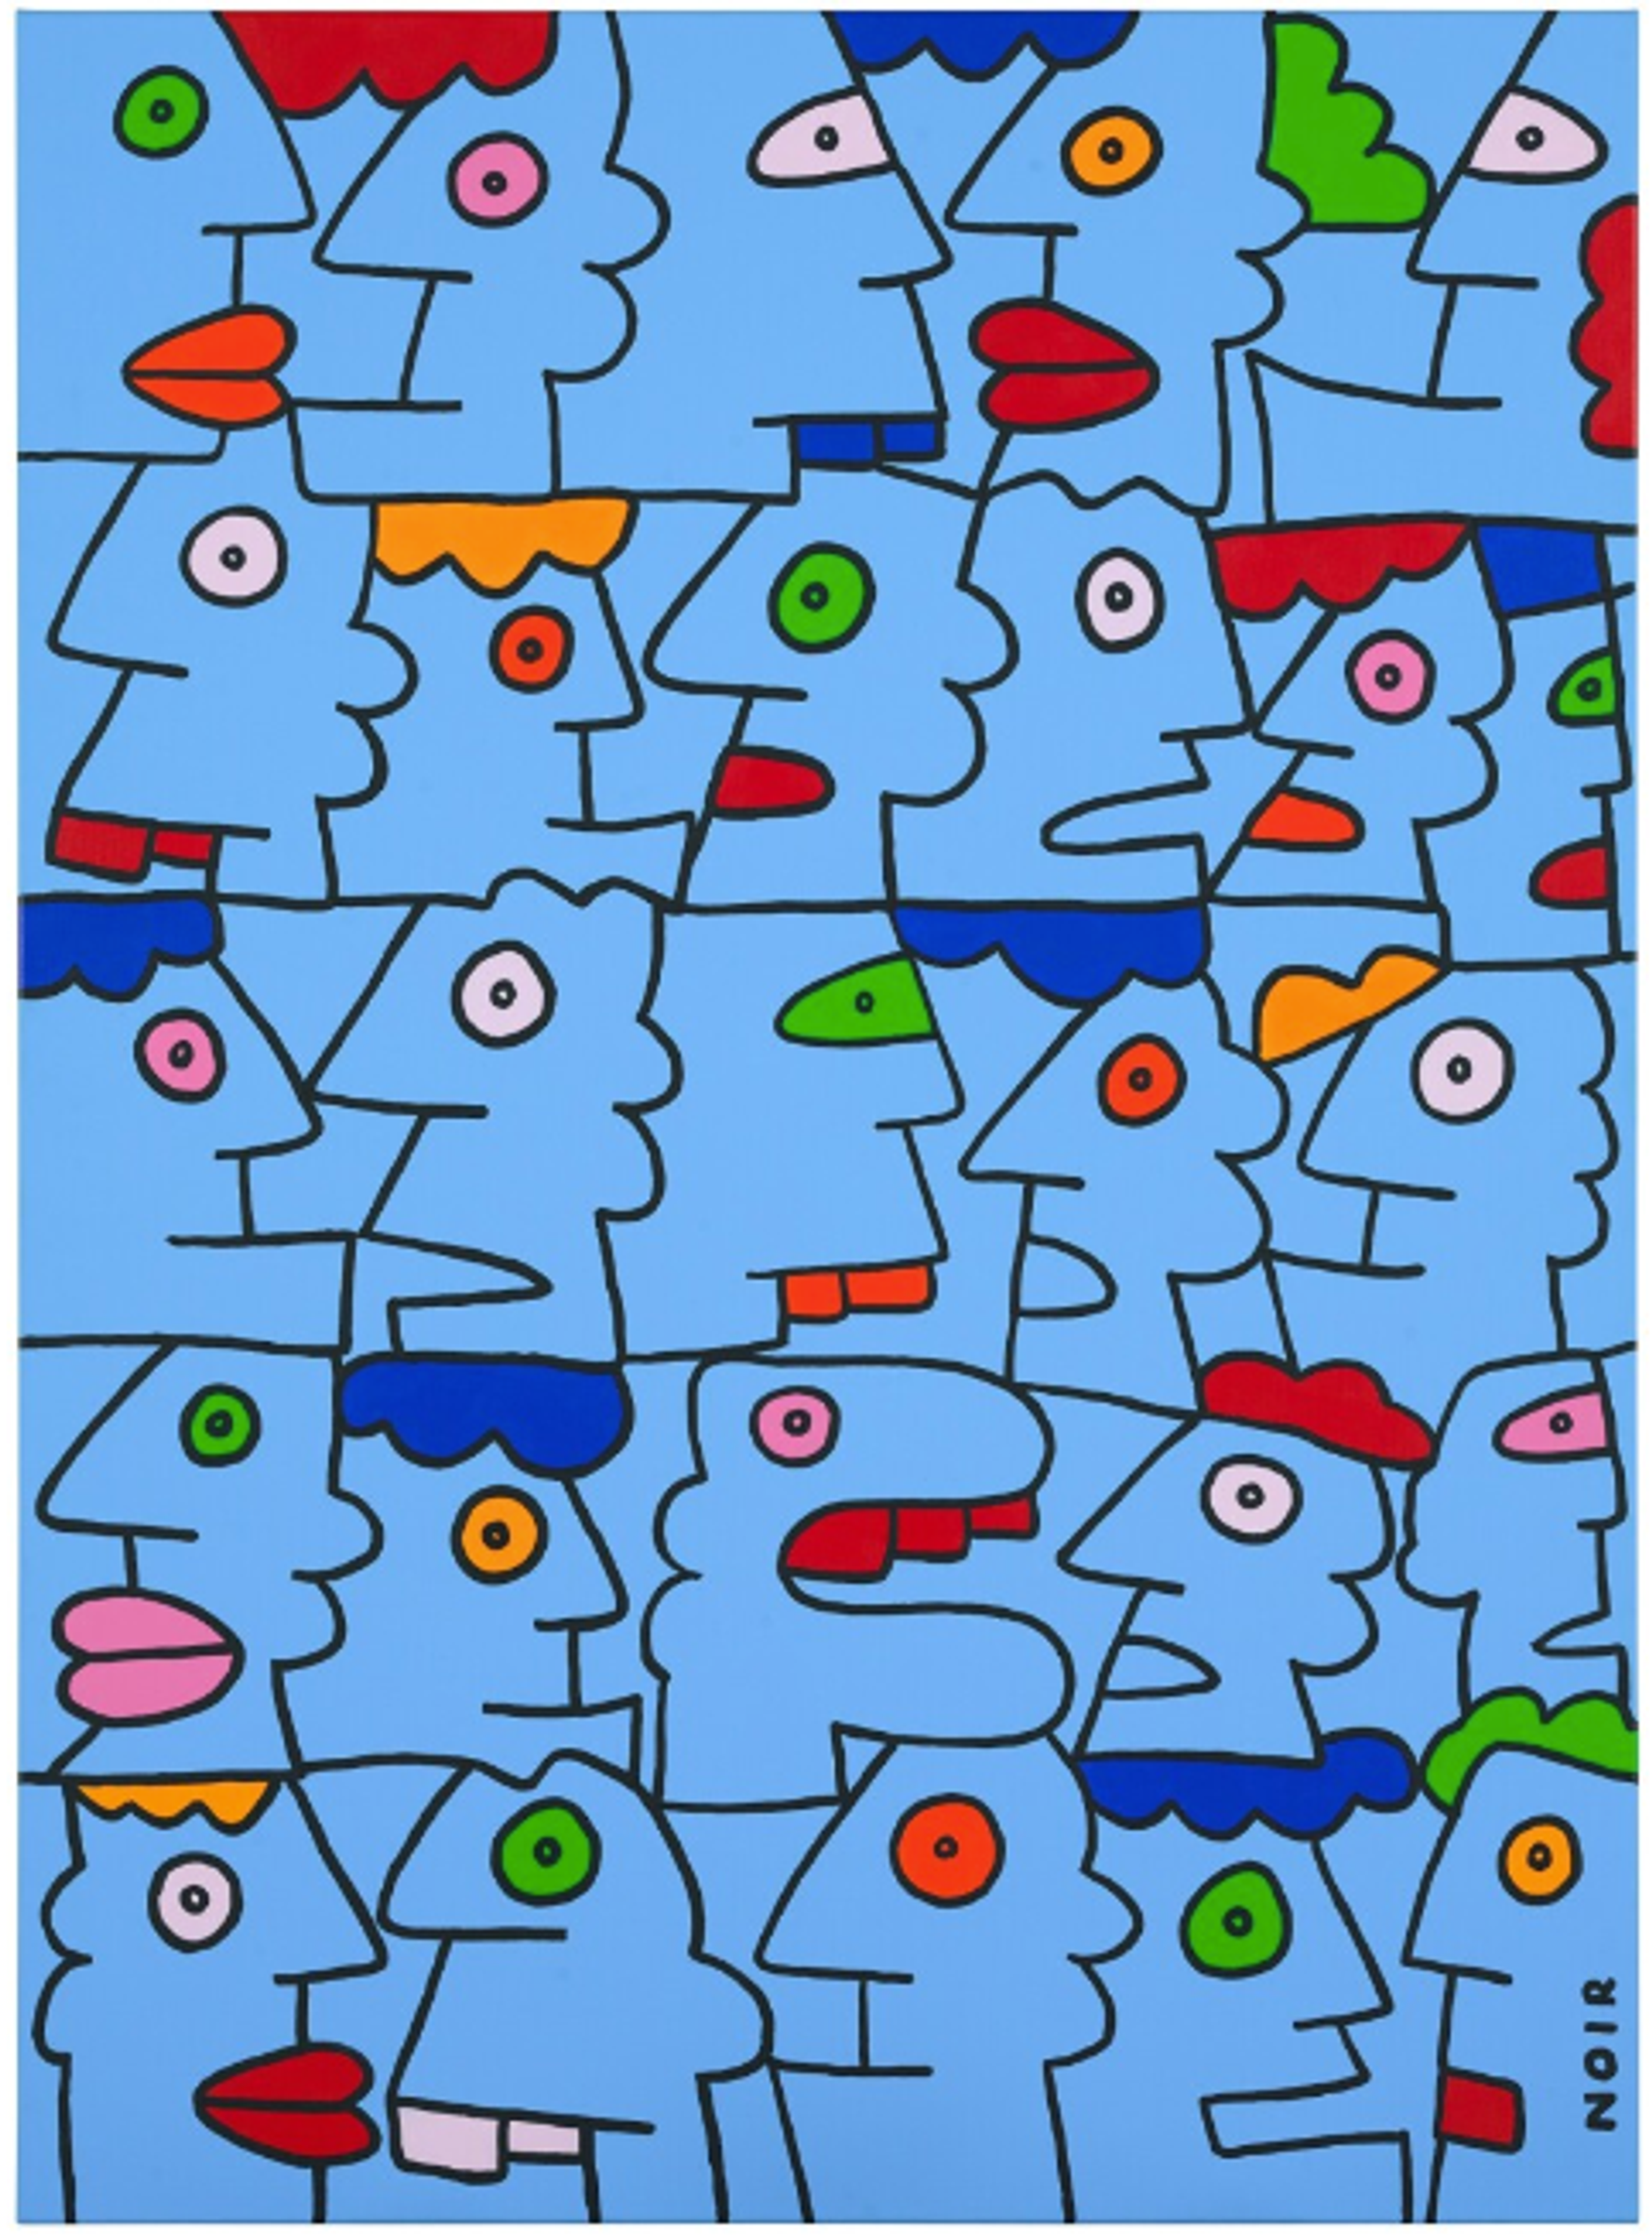 The Calm Sky Over the Pedestrian Street Makes Me Want To Walk Straight To The Shopping Mall by Thierry Noir - Sotheby's 2023